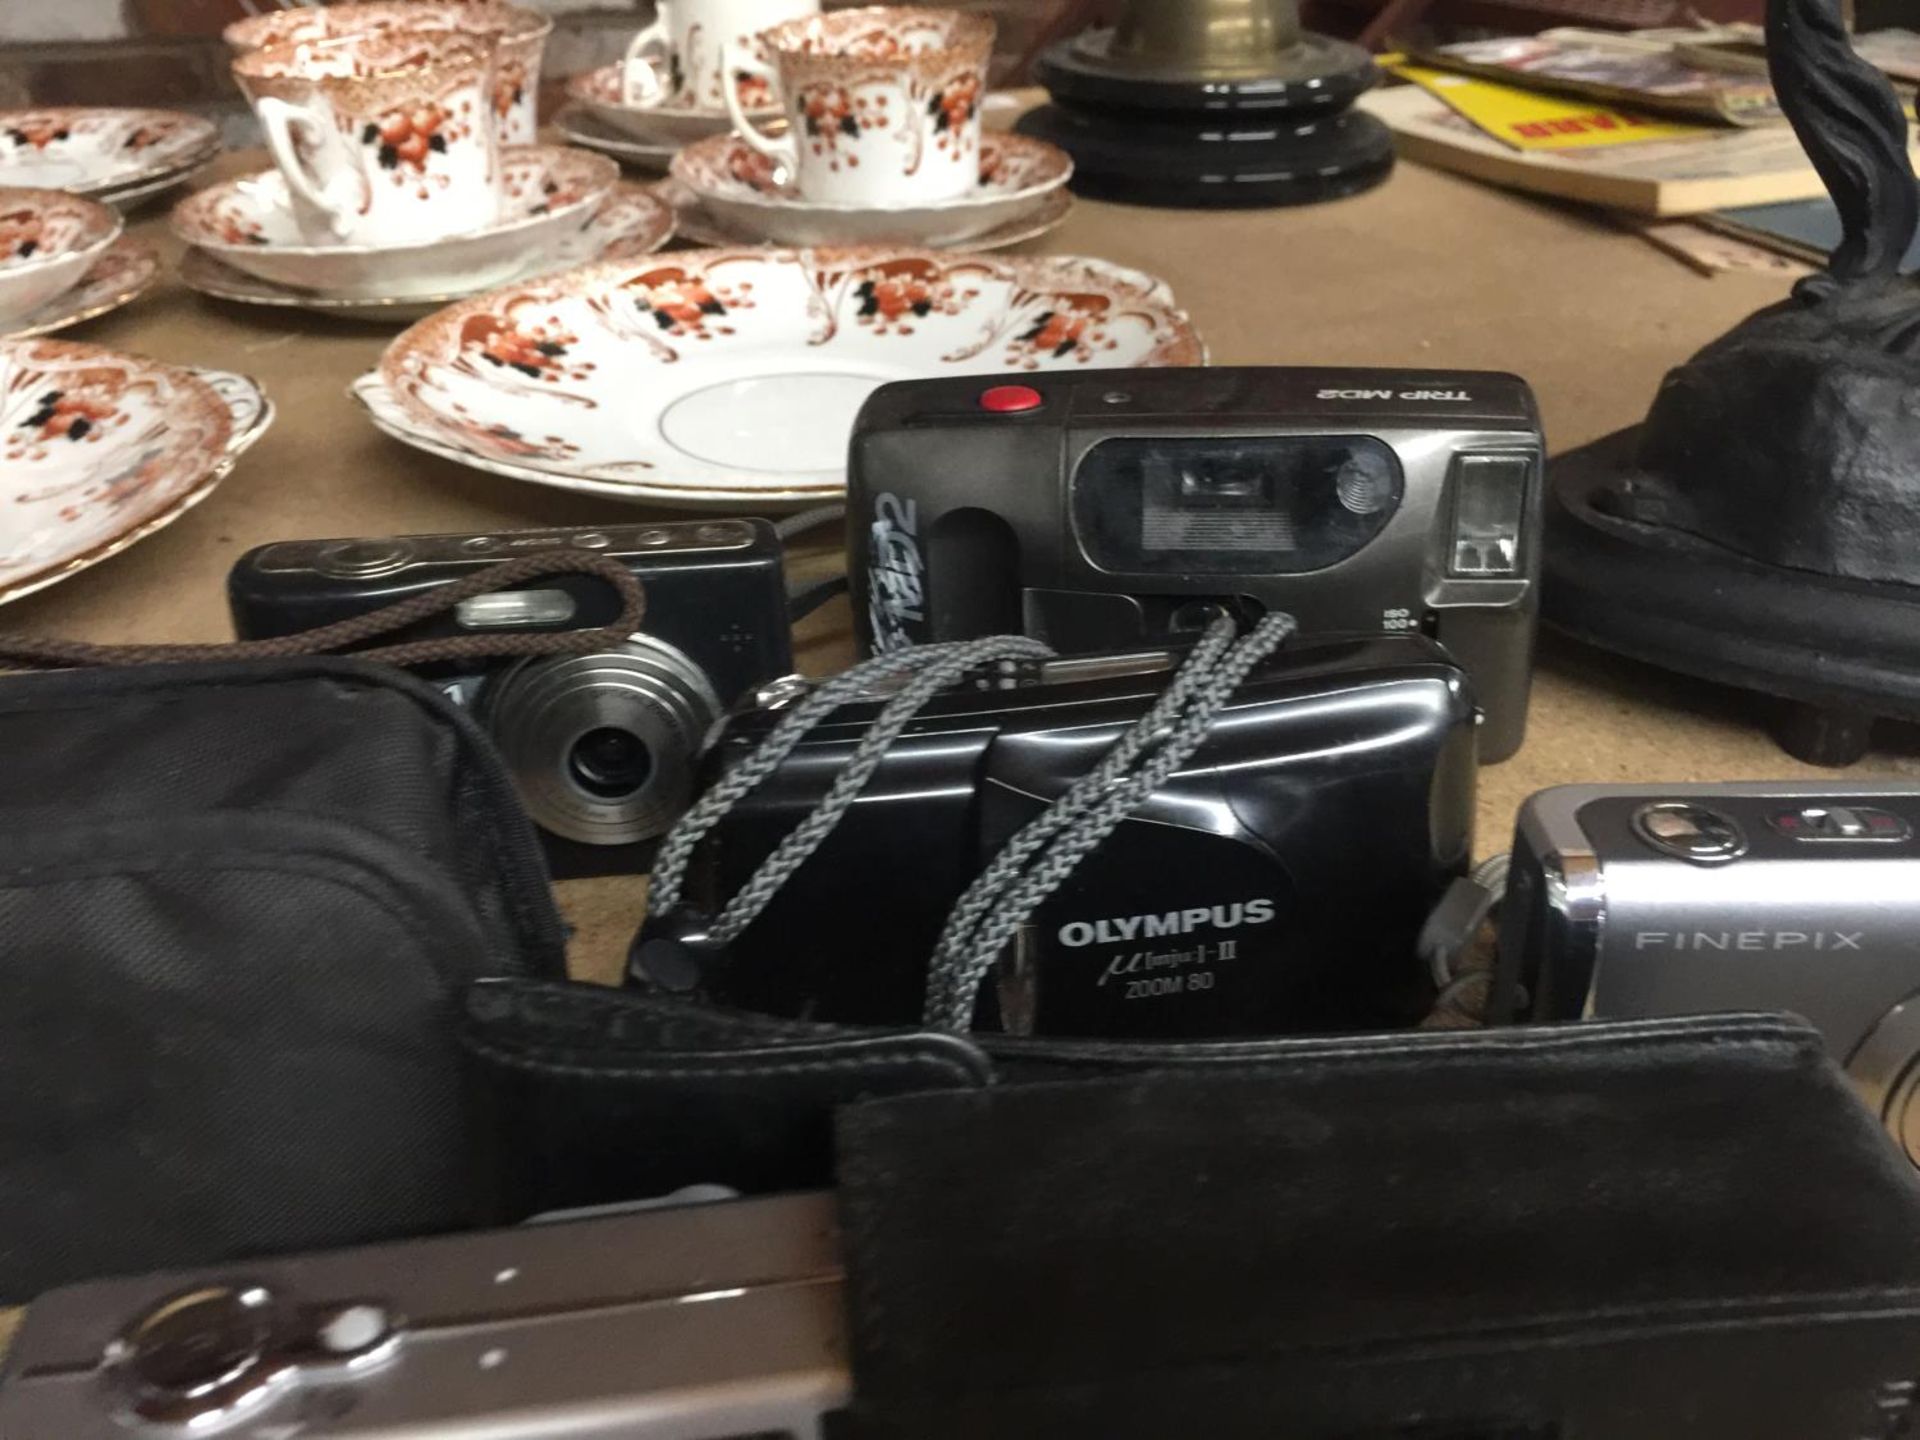 A QUANTITY OF VINTAGE CAMERAS TO INCLUDE A CANON EXUS III, FUJIFILM FINEPIX, OLYMPUS ZOOM 80, ETC - Image 4 of 7